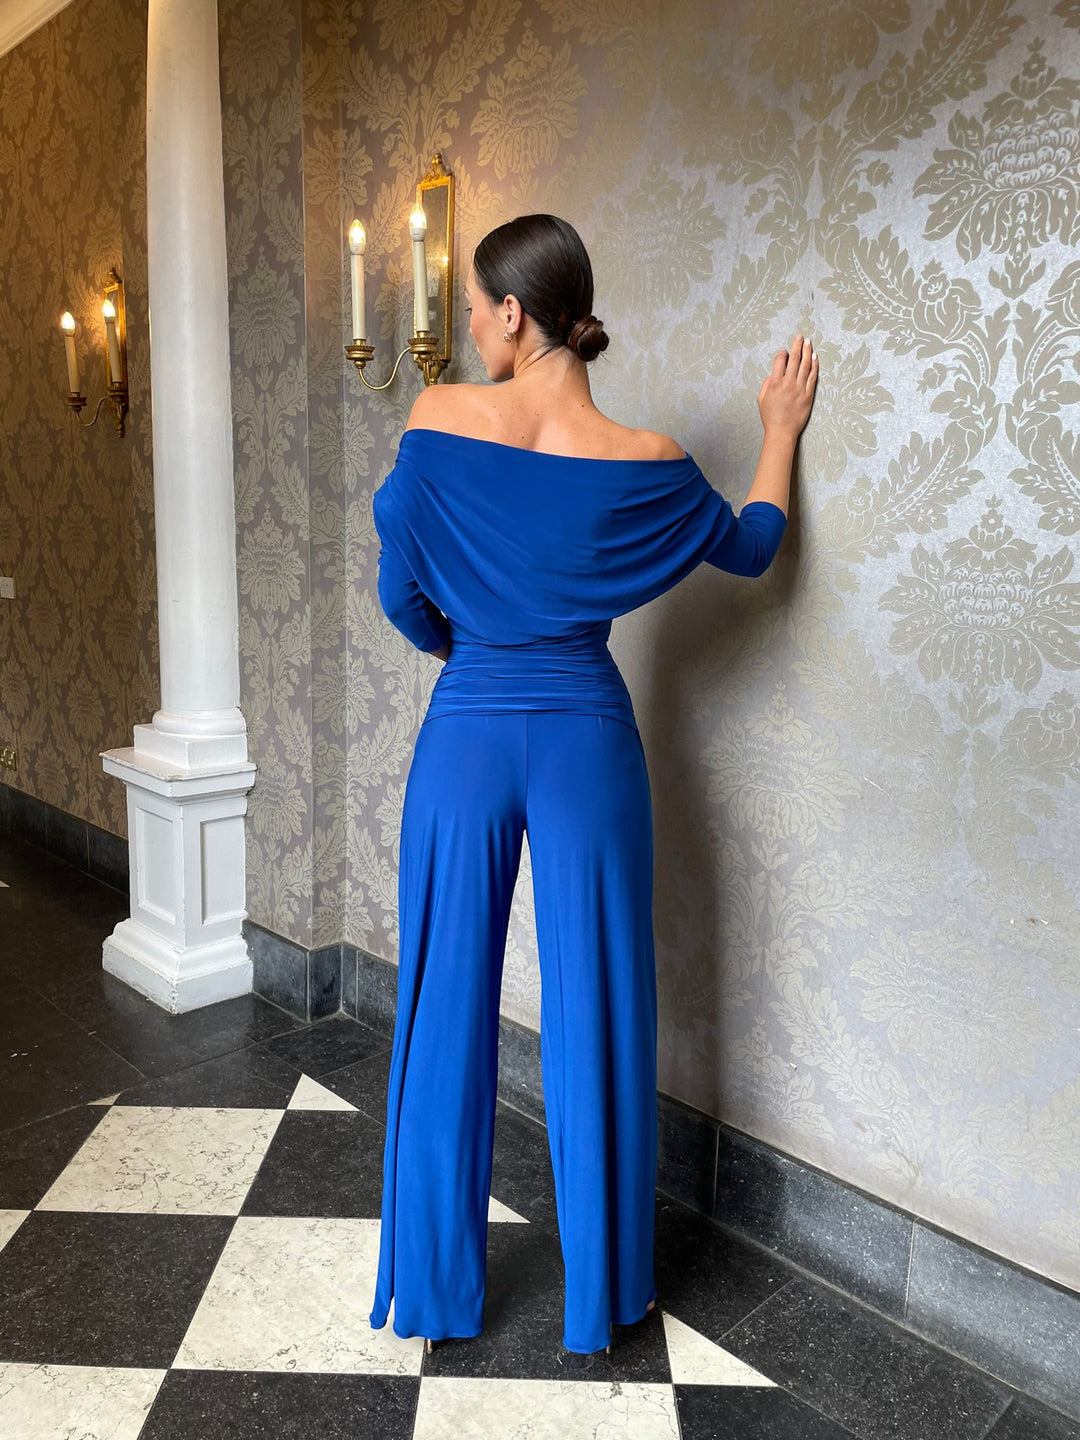 ATOM LABEL carbon jumpsuit with sleeve in cobalt